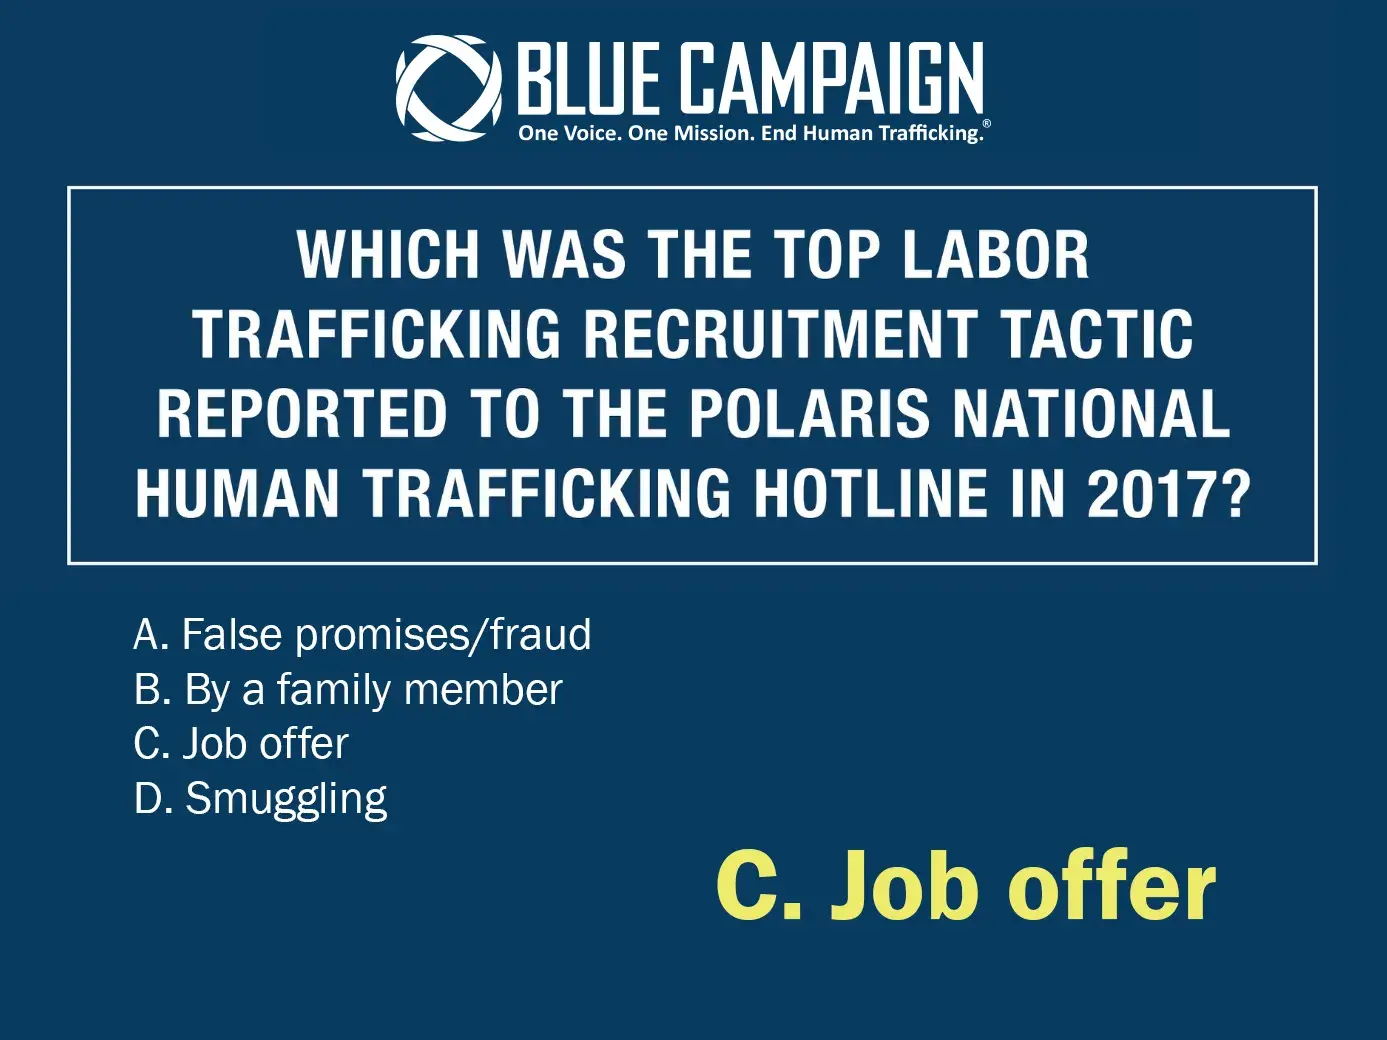 Which was the top labor trafficking recruitment tactic report to the Polaris National Human Trafficking Hotline in 2017? A: False promises/fraud, B: By a family member, C: Job Offer, D: Smuggling. The answer is C: Job Offer. Blue Campaign. One Voice. One Mission. End Human Trafficking.